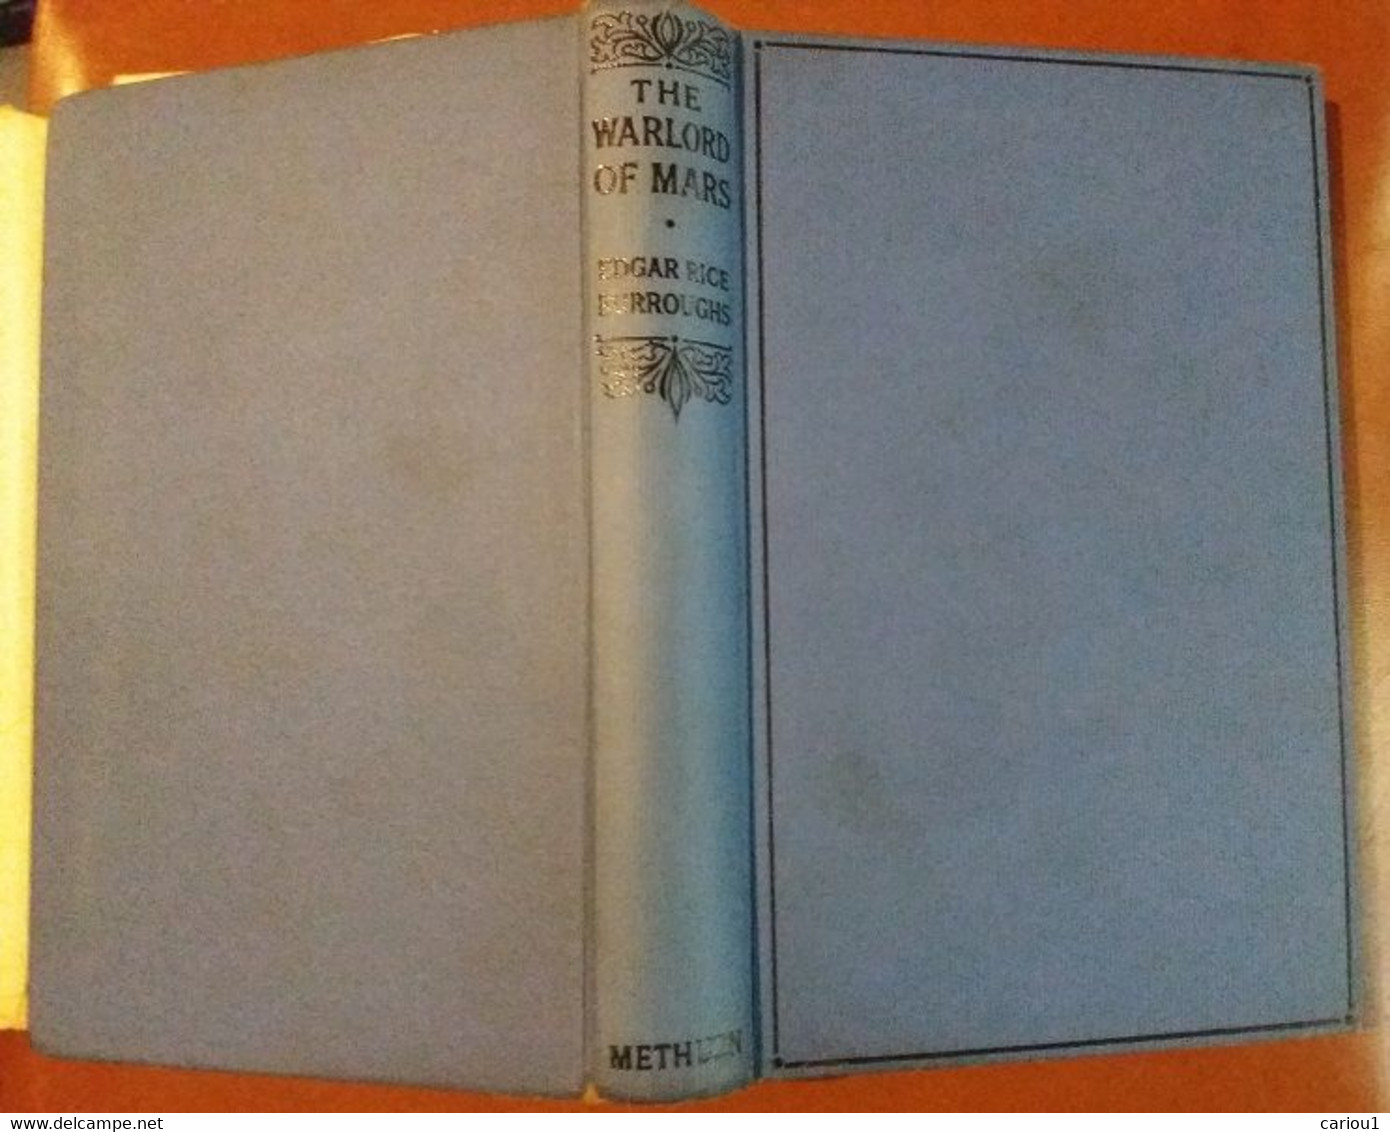 C1 Edgar Rice Burroughs THE WARLORD OF MARS Methuen 1935 JAQUETTE Dust Jacket PORT INCLUS France - Before 1950